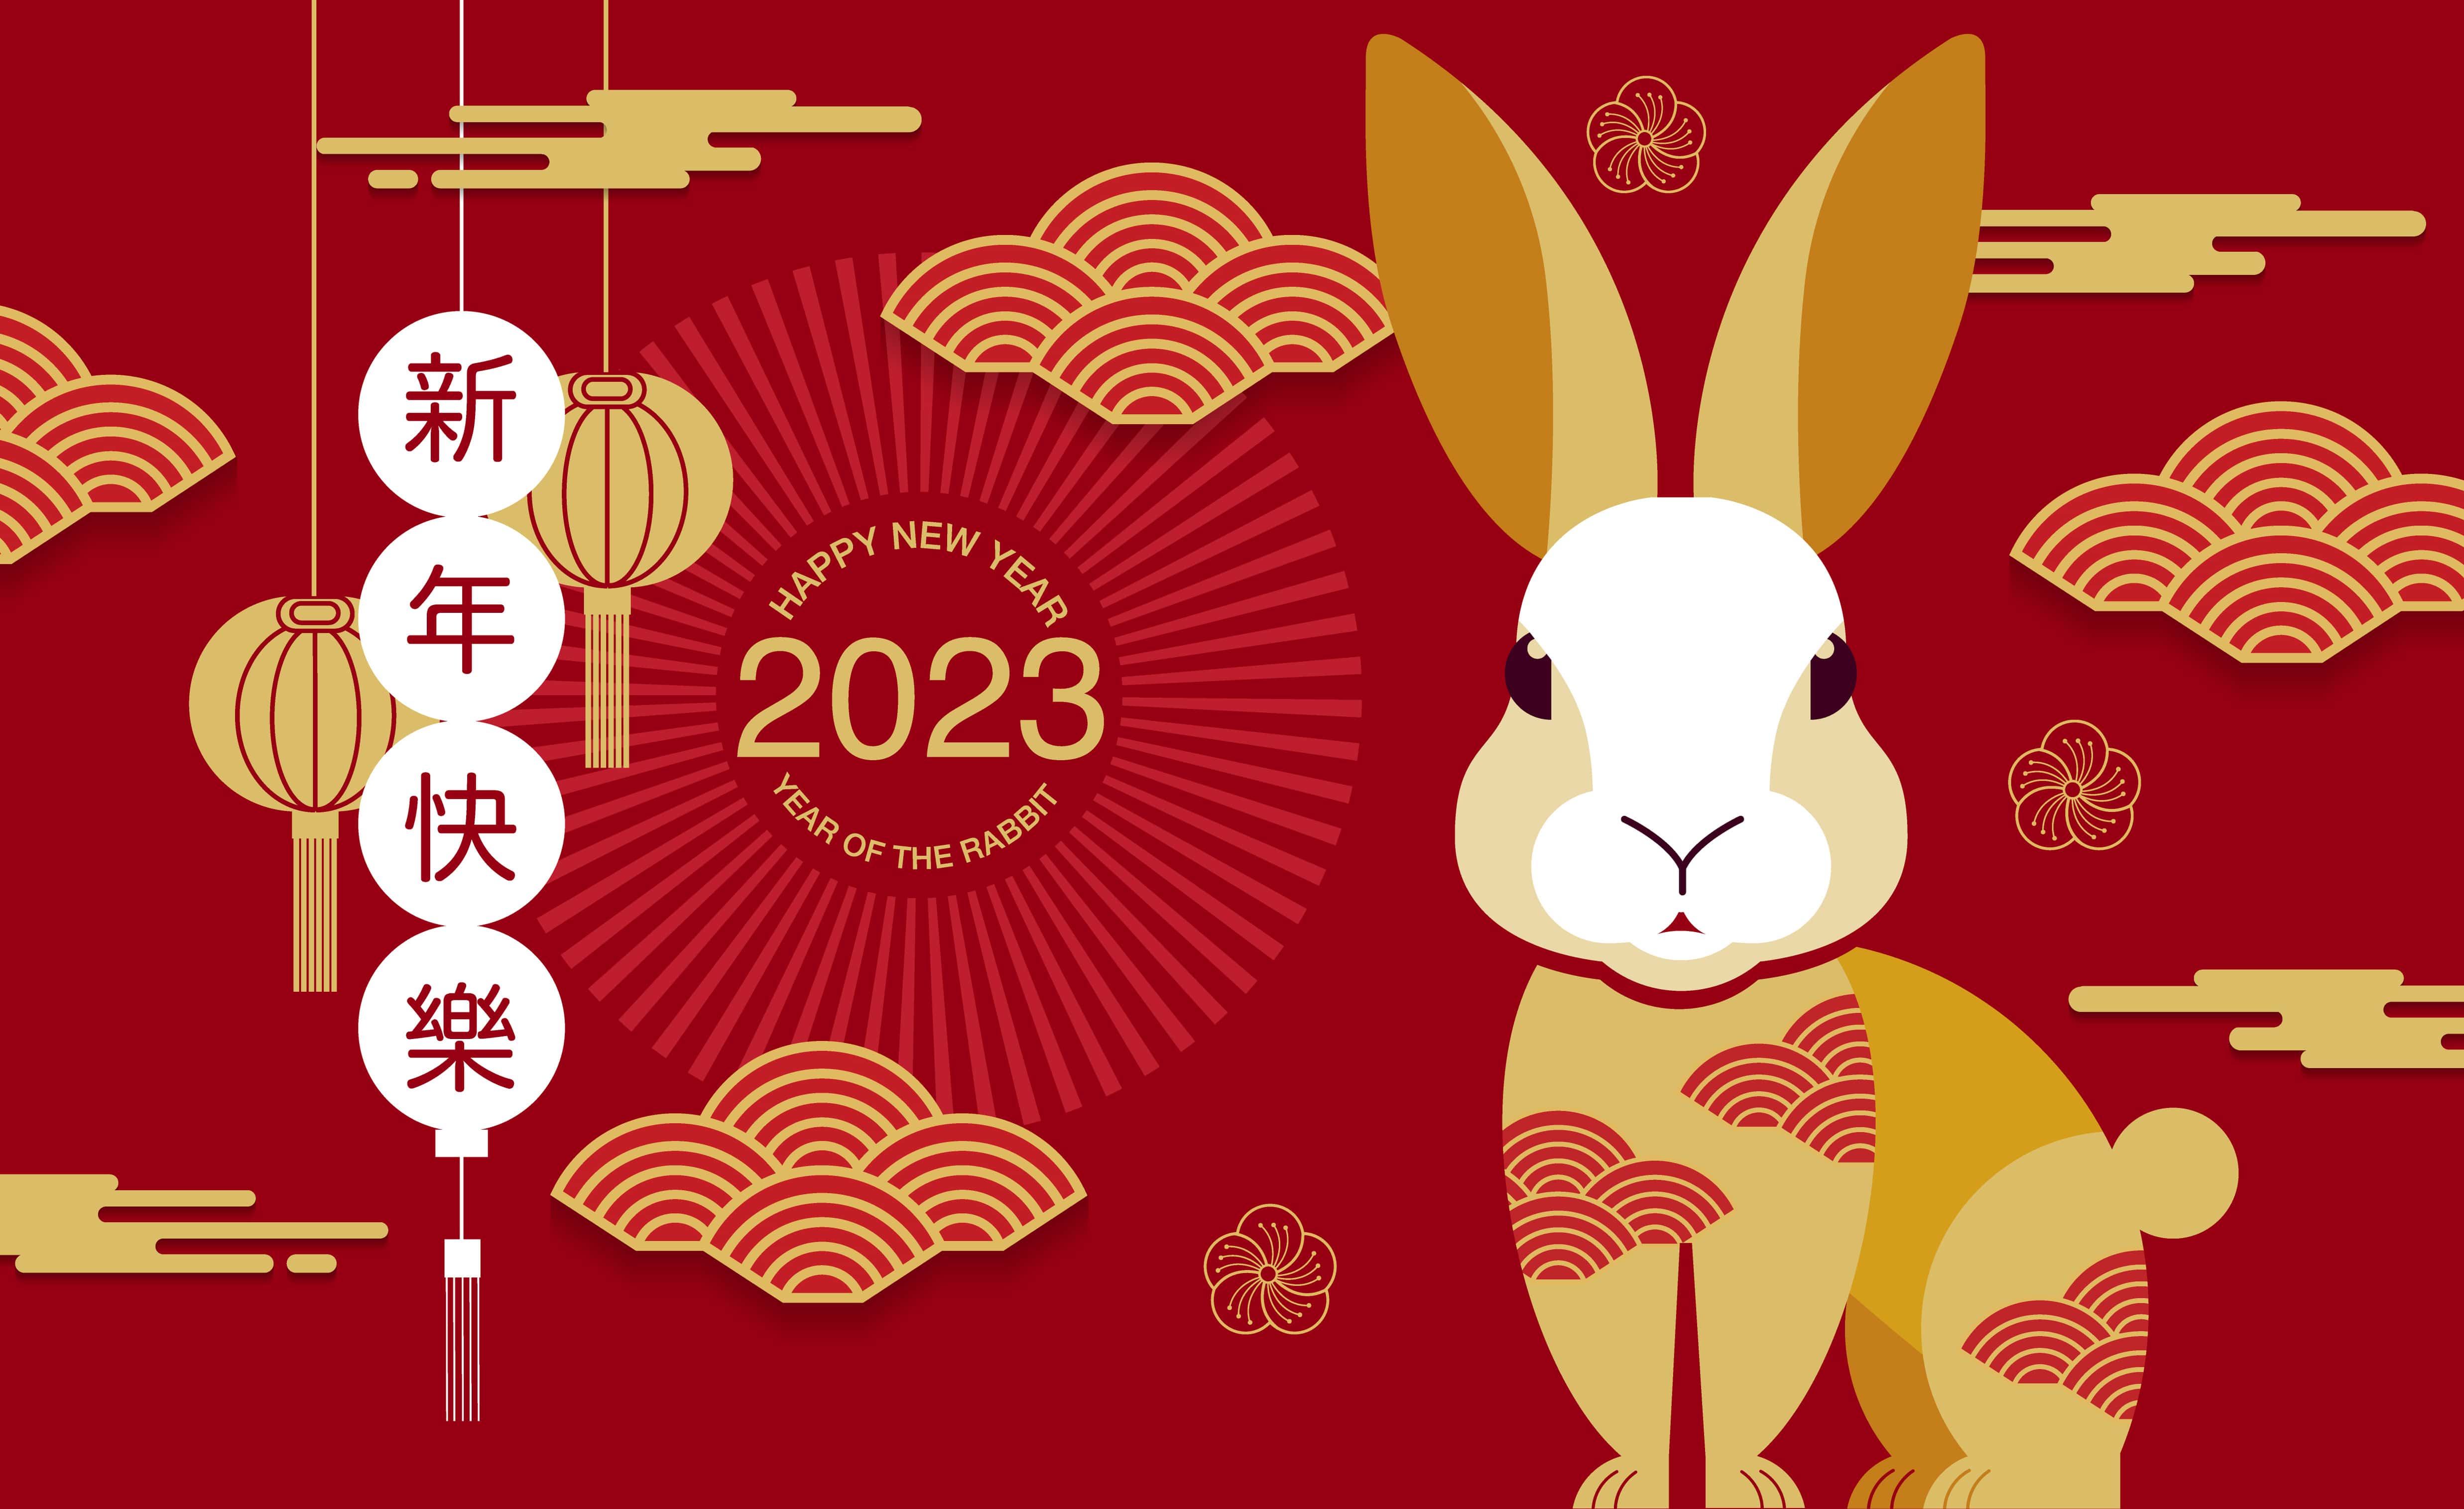 The great annual horoscope 2023 is the year of the Rabbit!